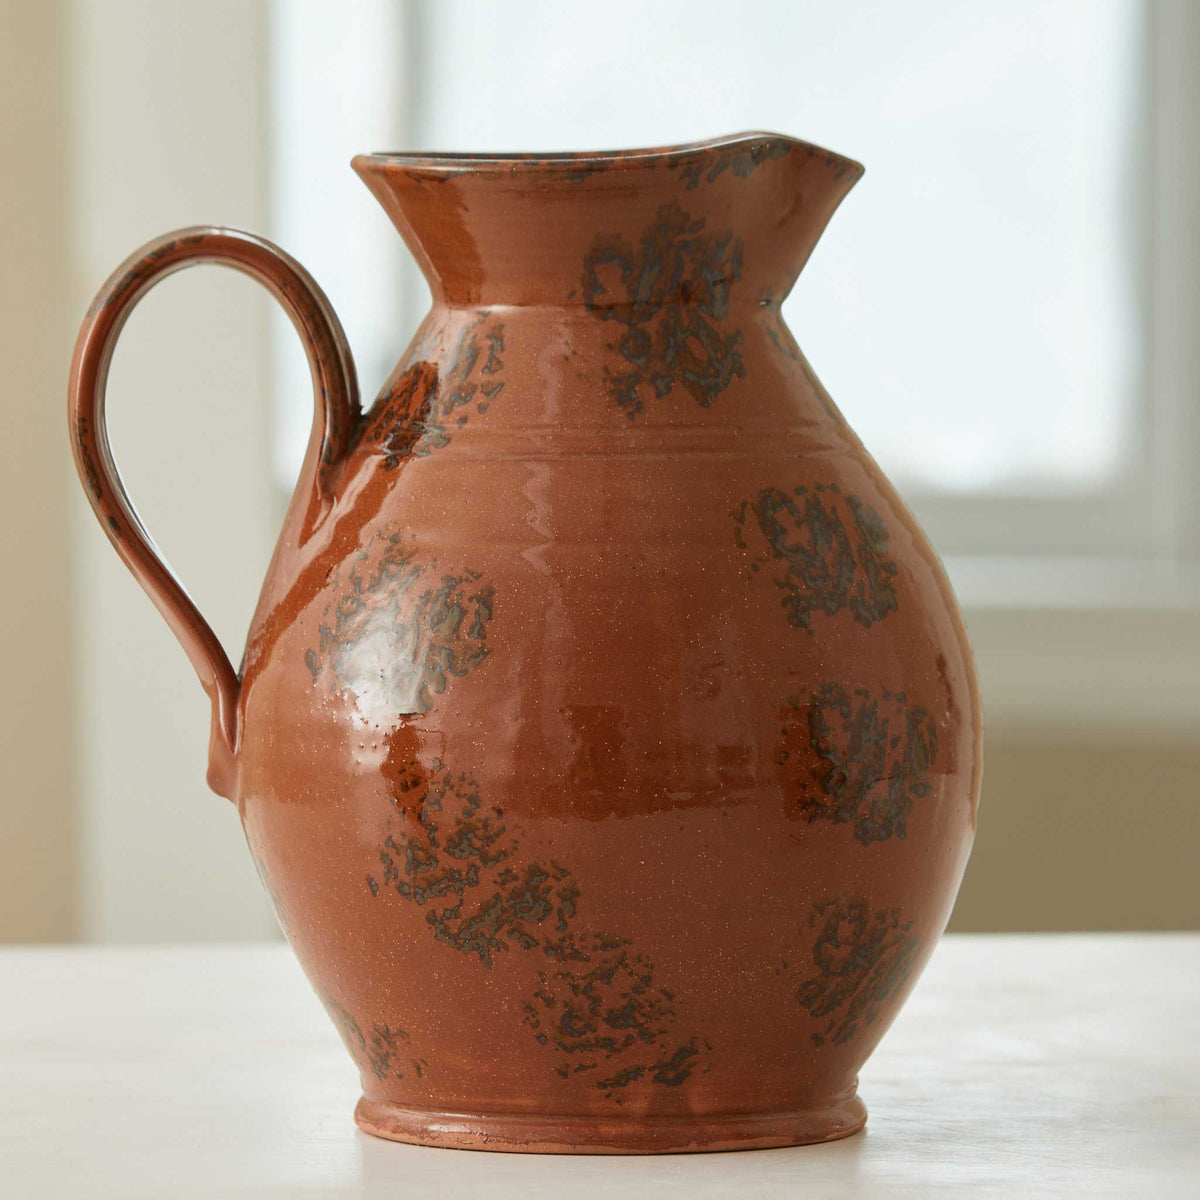 LIMITED EDITION REDWARE PITCHERS